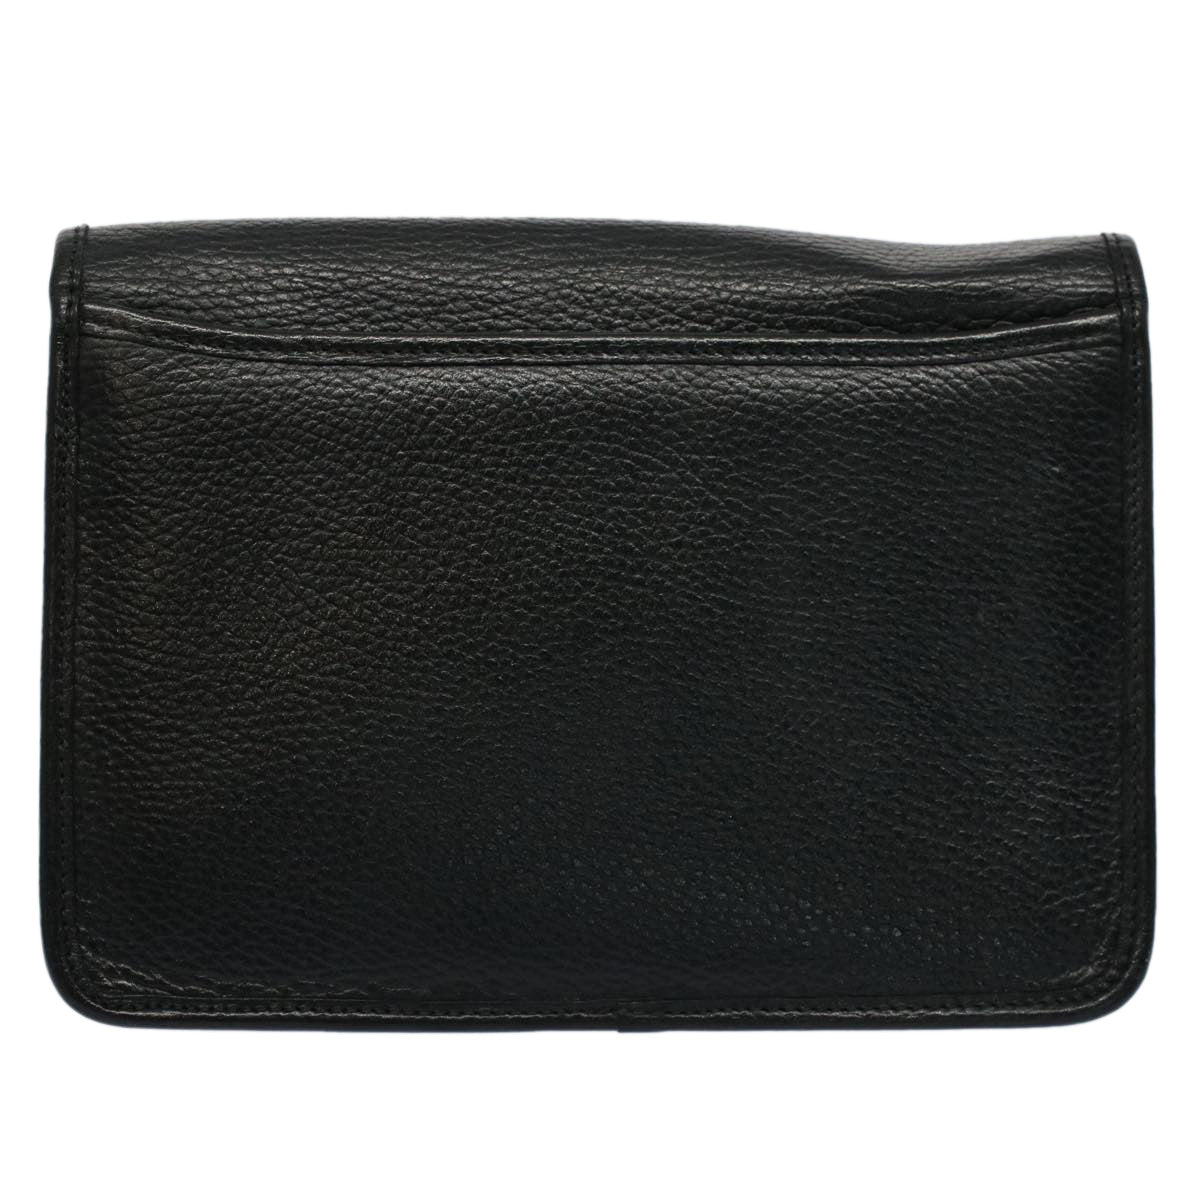 Burberrys Clutch Bag Leather Black Auth bs9049 - 0